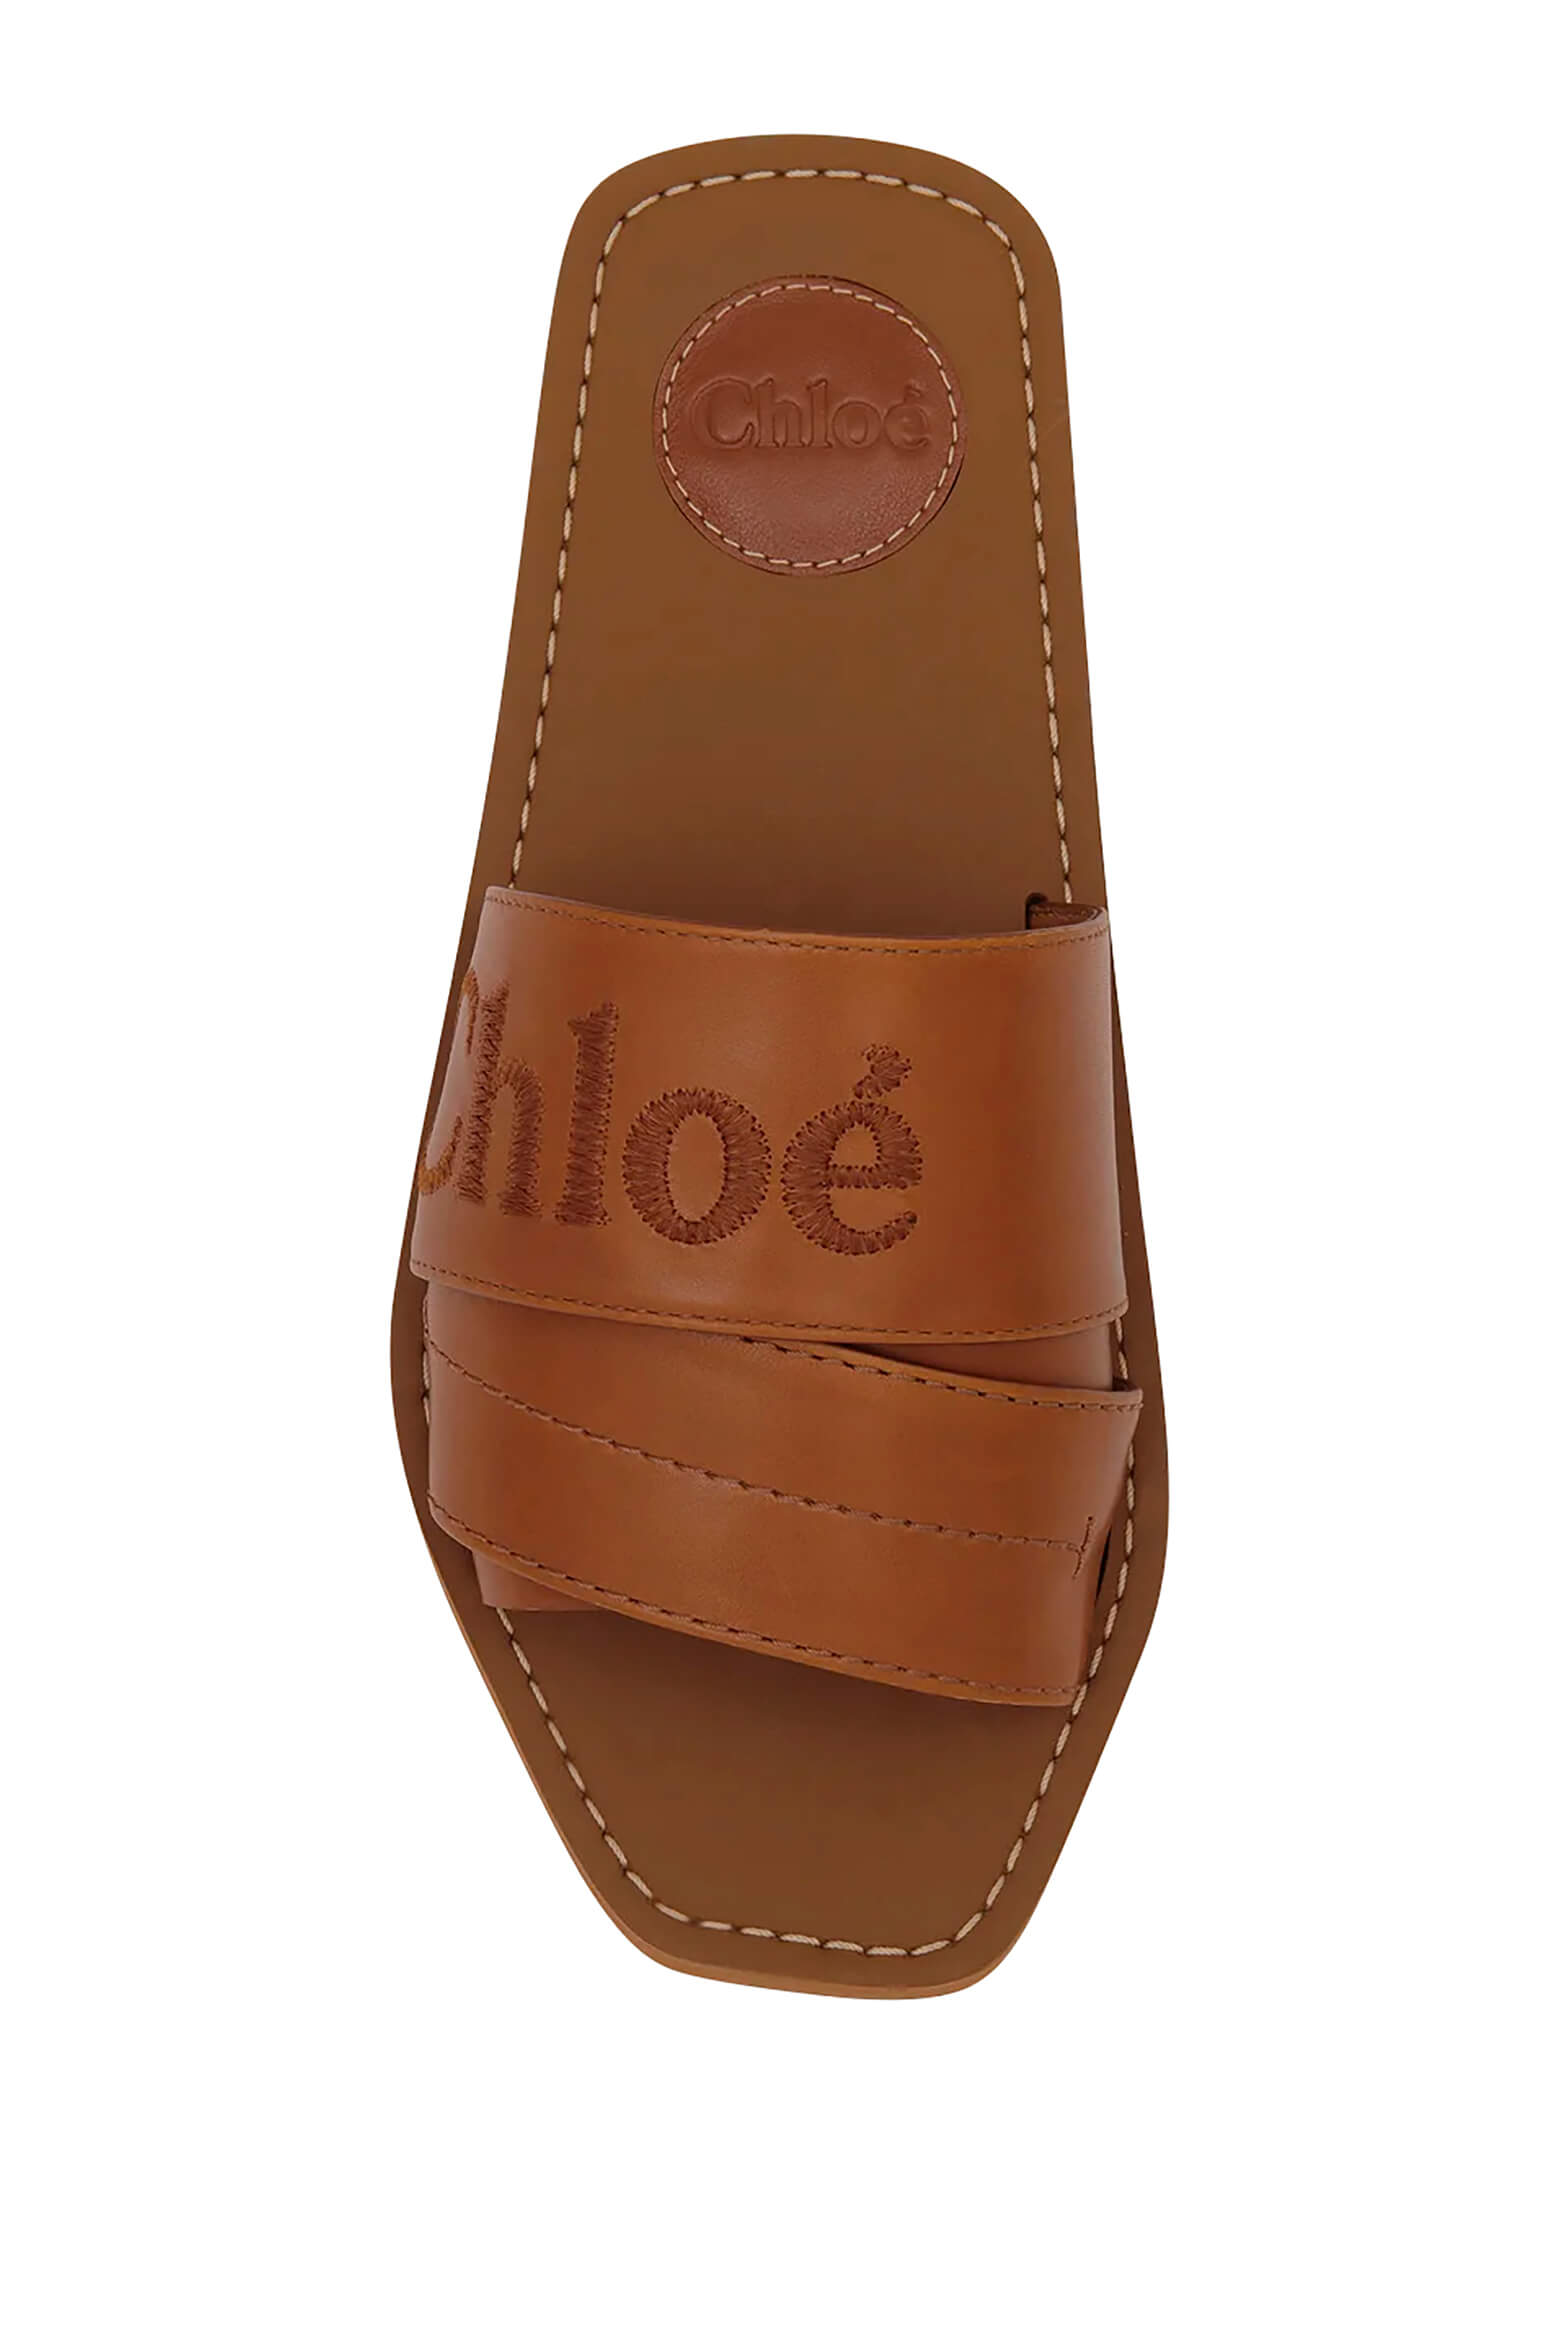 Chloe Woody Leather Slide in Caramel from The New Trend